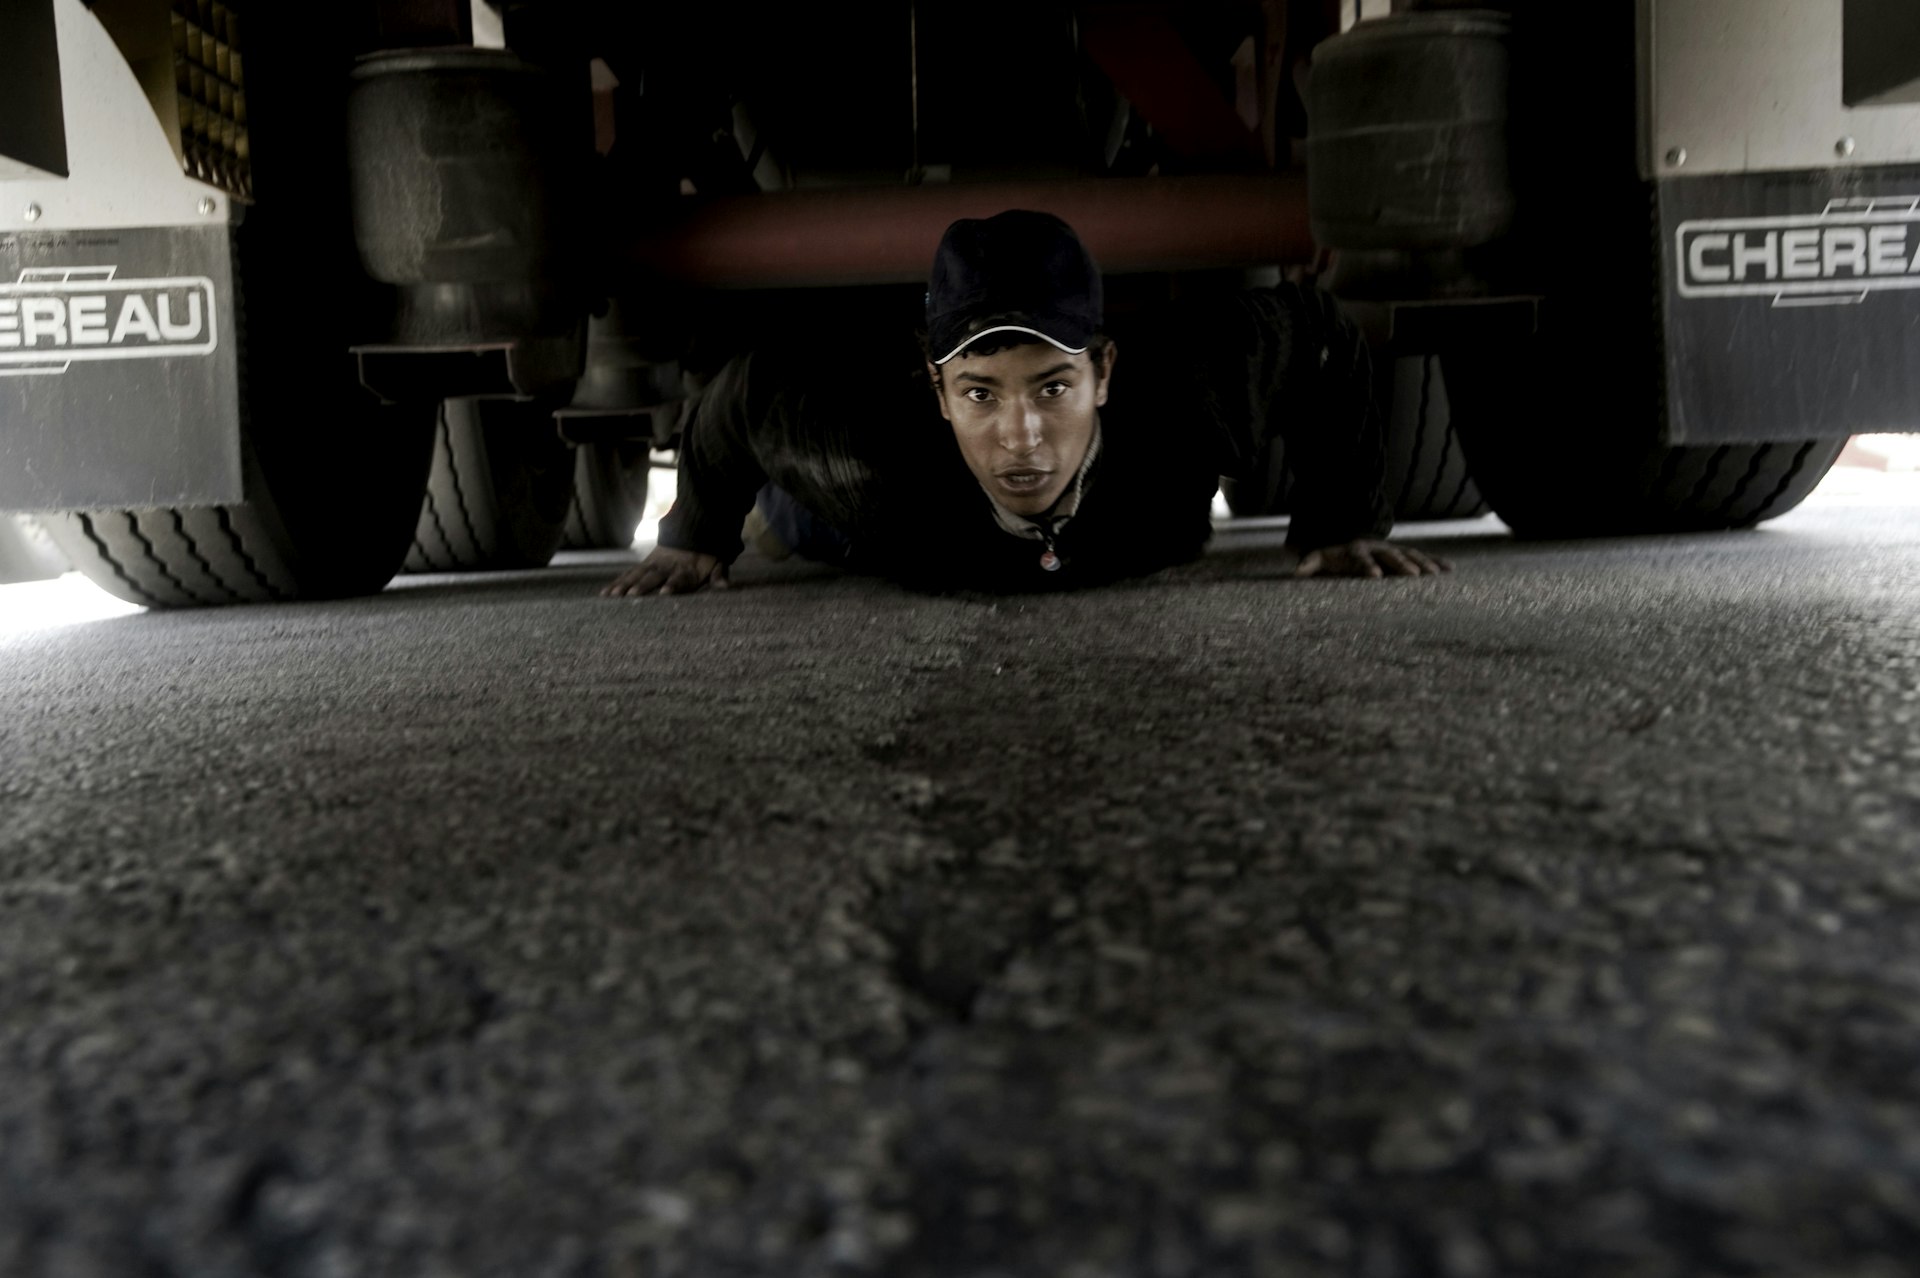 A young Afghan tries to get himself in the axle of a truck that is headed for Italy through the Greek harbour of Patras. Hiding in the axle of a truck is about as dangerous as it gets. Get it wrong, and it can end up costing you your legs.